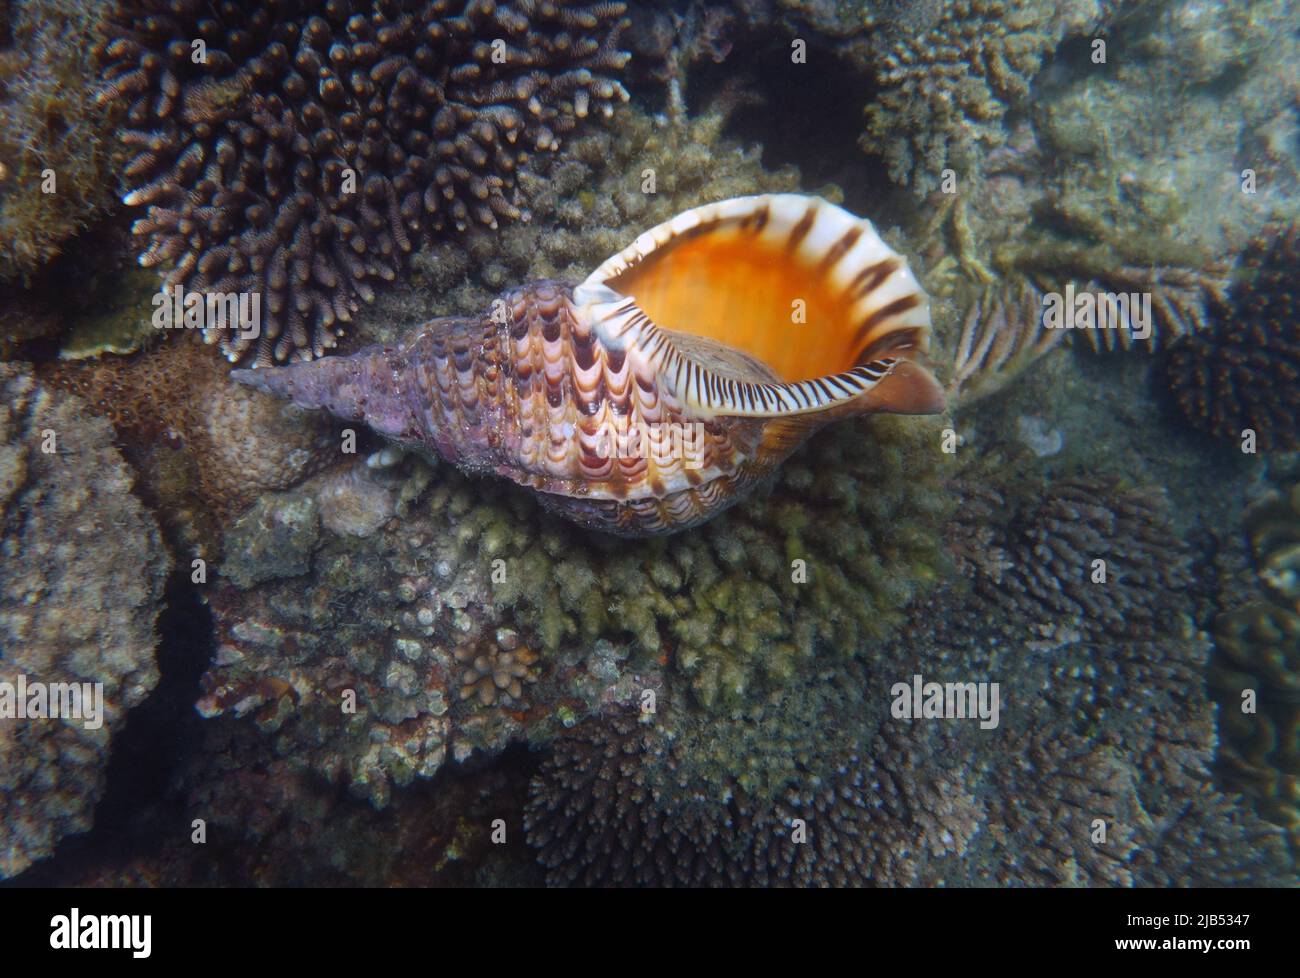 Live triton shell (Charonia tritonis) underwater at Fitzroy Island, Great Barrier Reef, Queensland, Australia Stock Photo